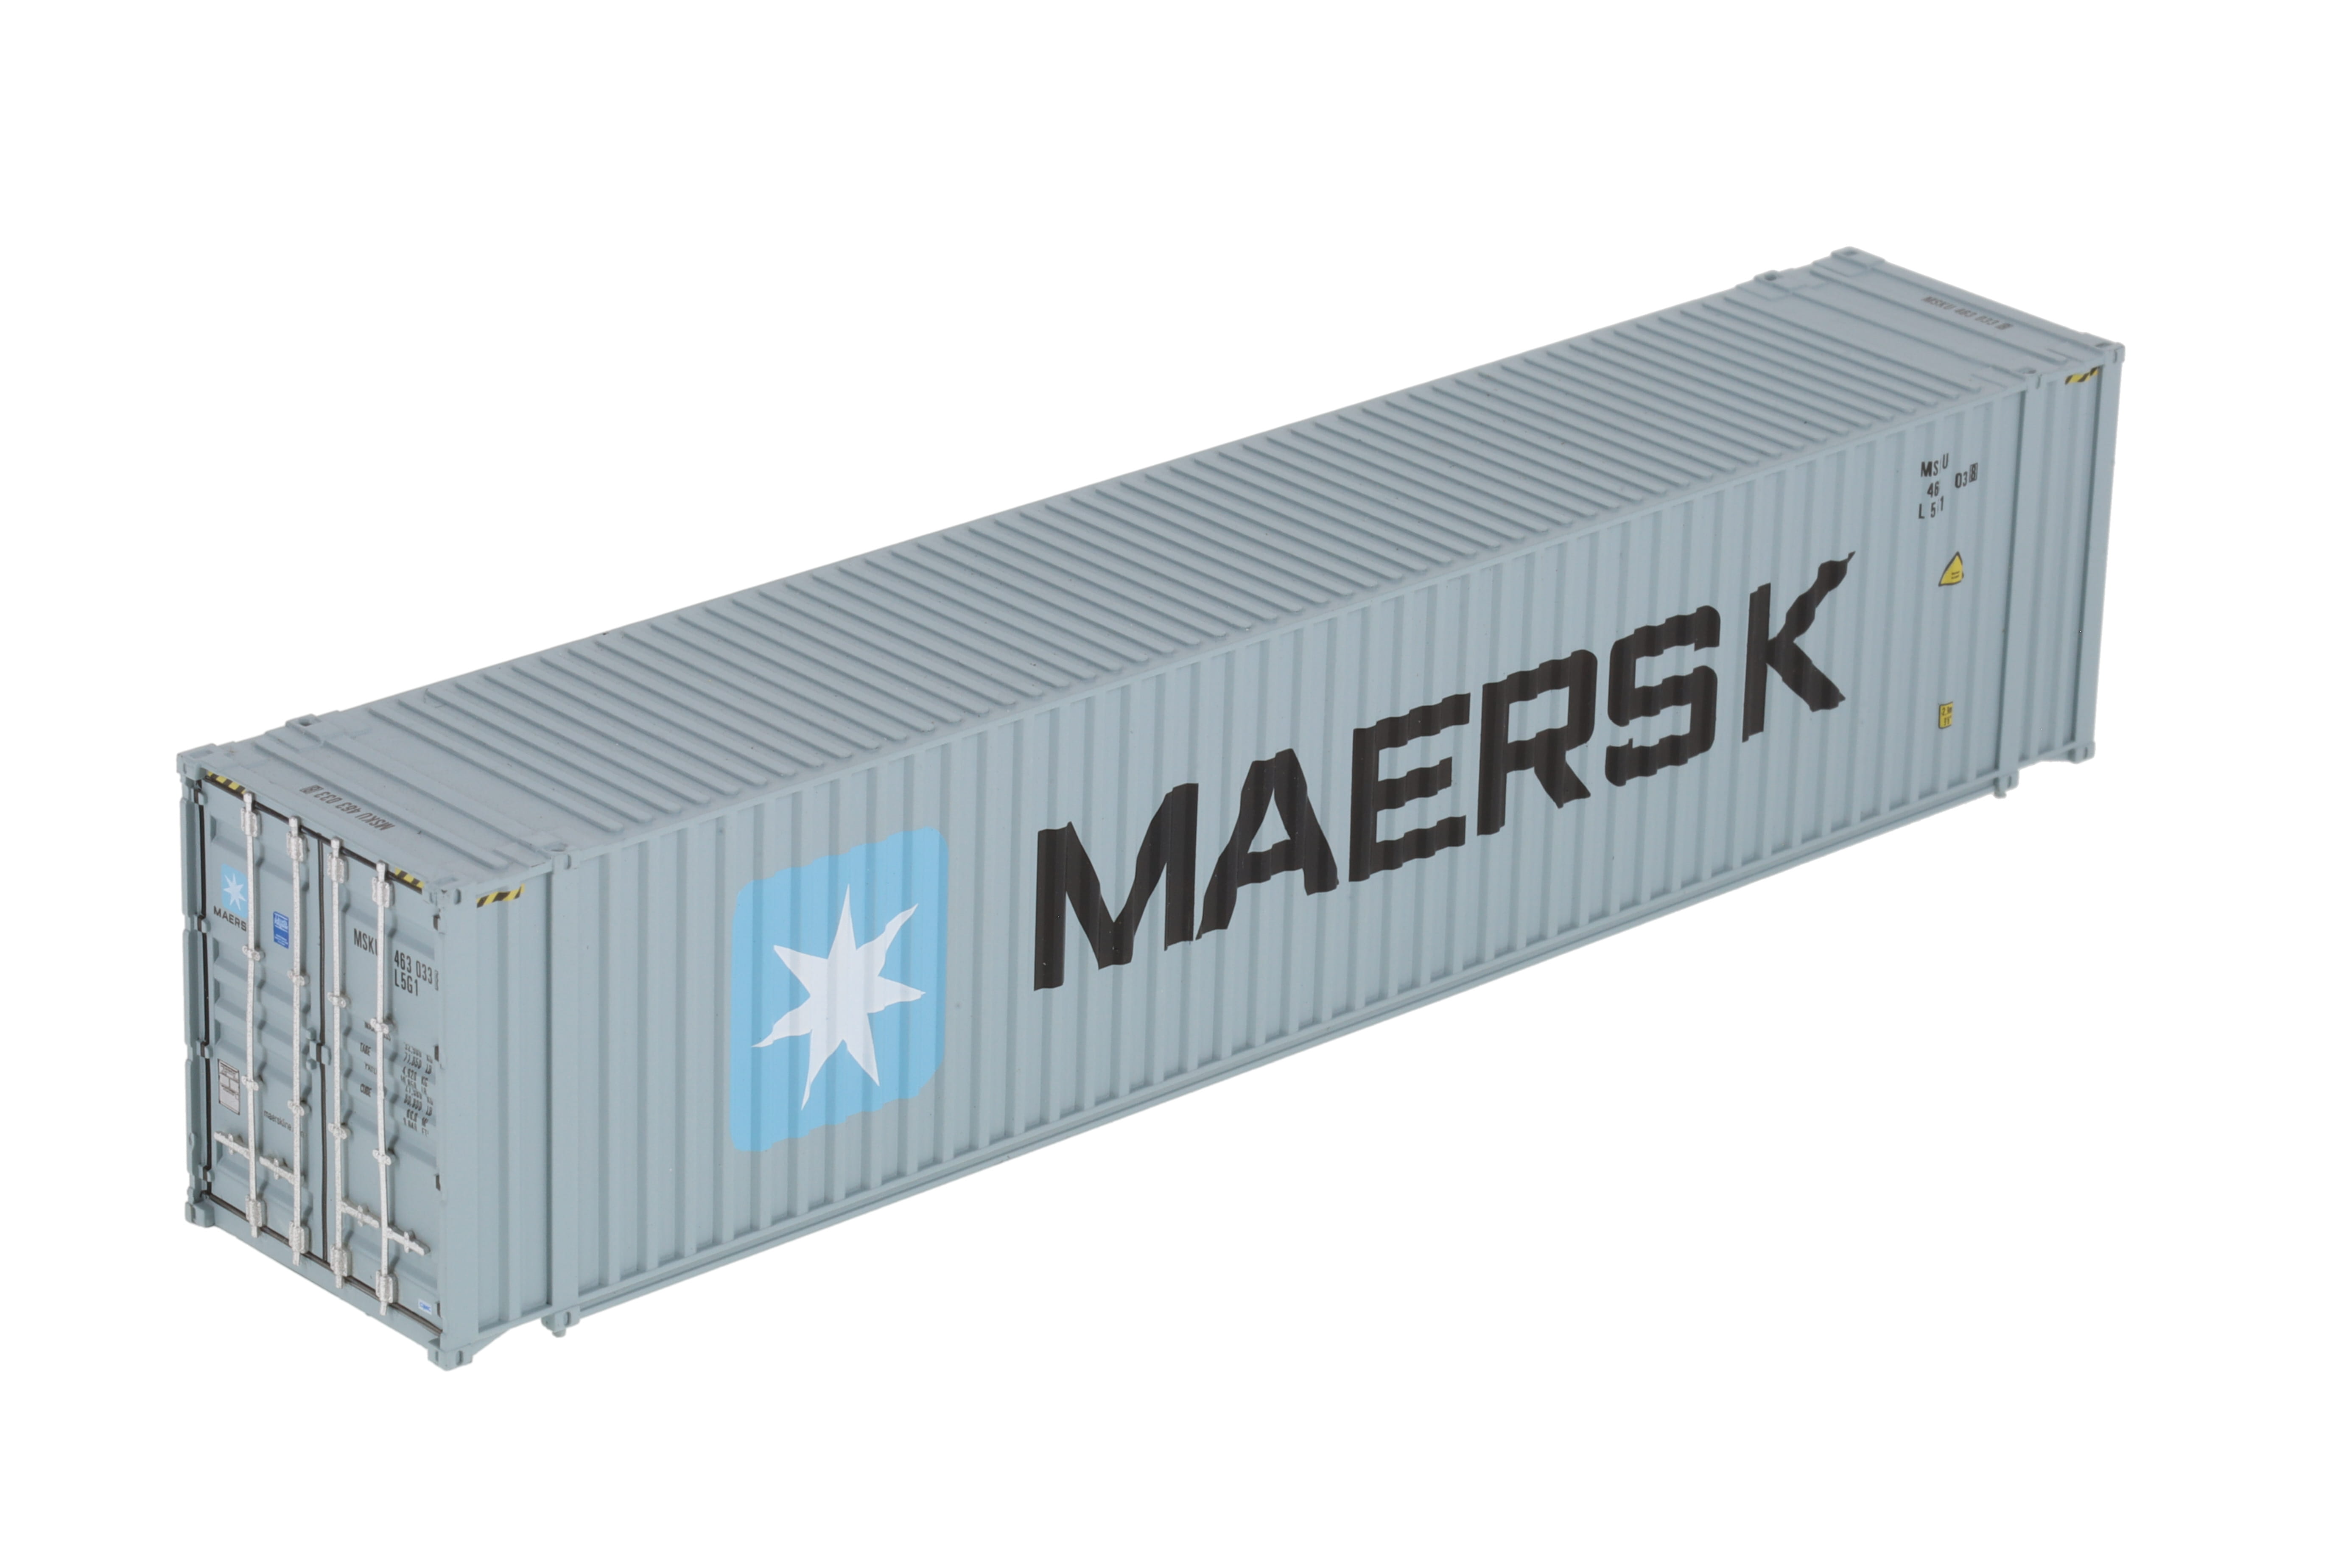 45" Container "Maersk" 